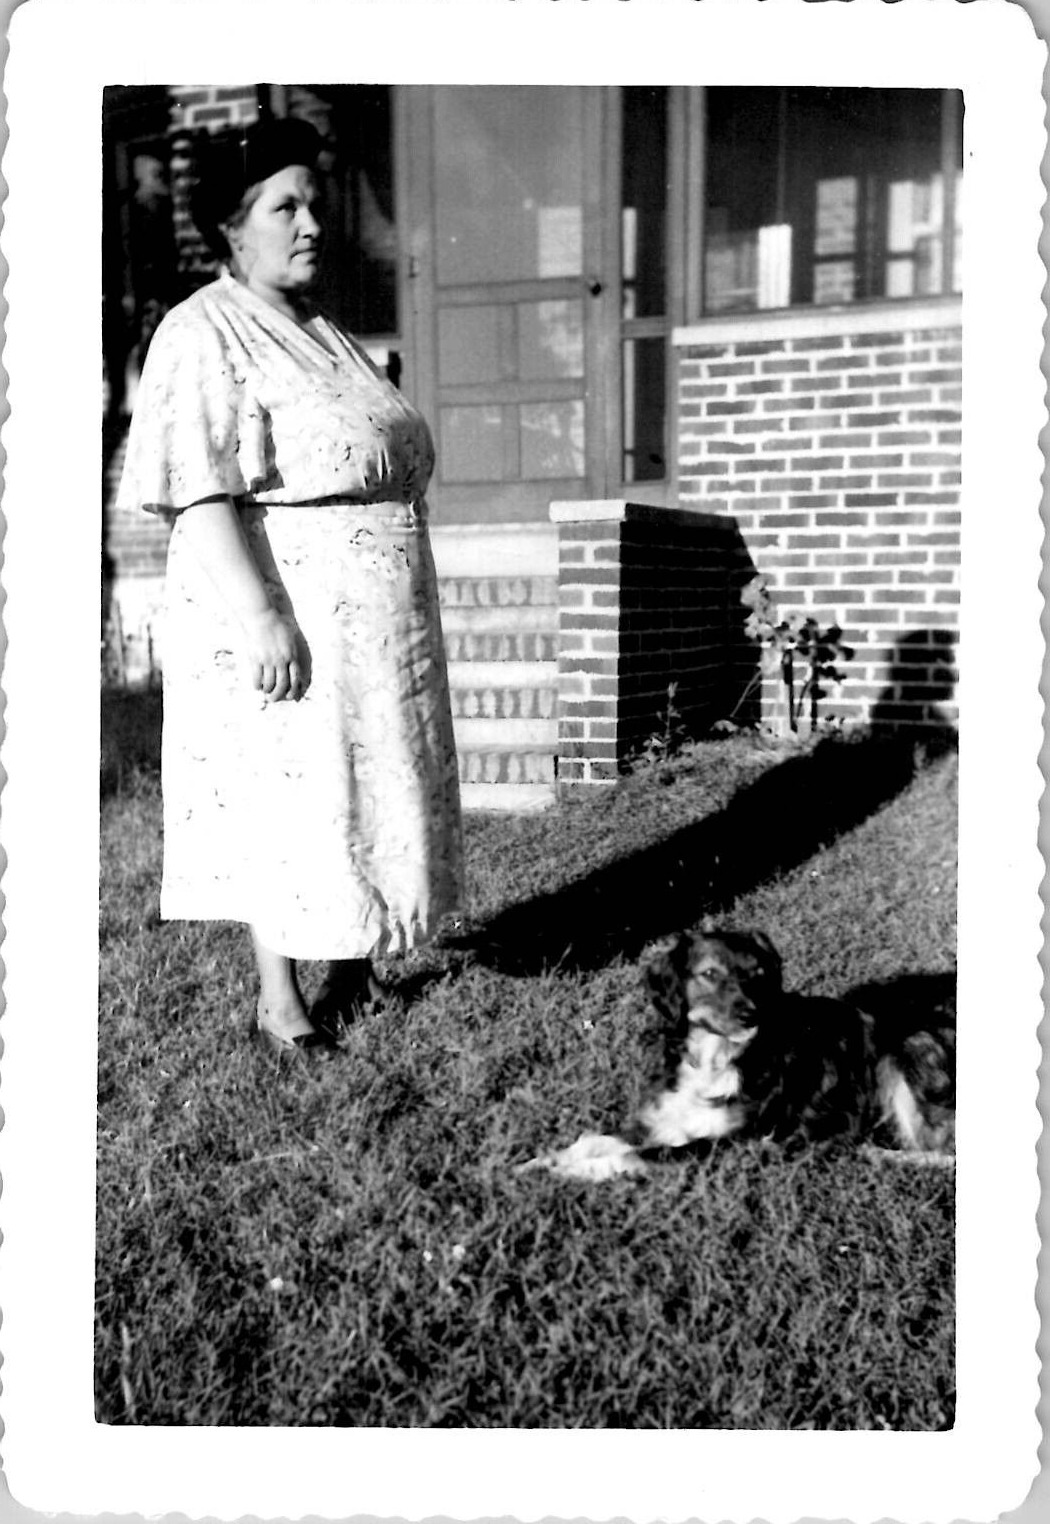 Fat Obese Woman Grandma with Dog Puppy Rural Farm Americana 1950s Vintage Photo